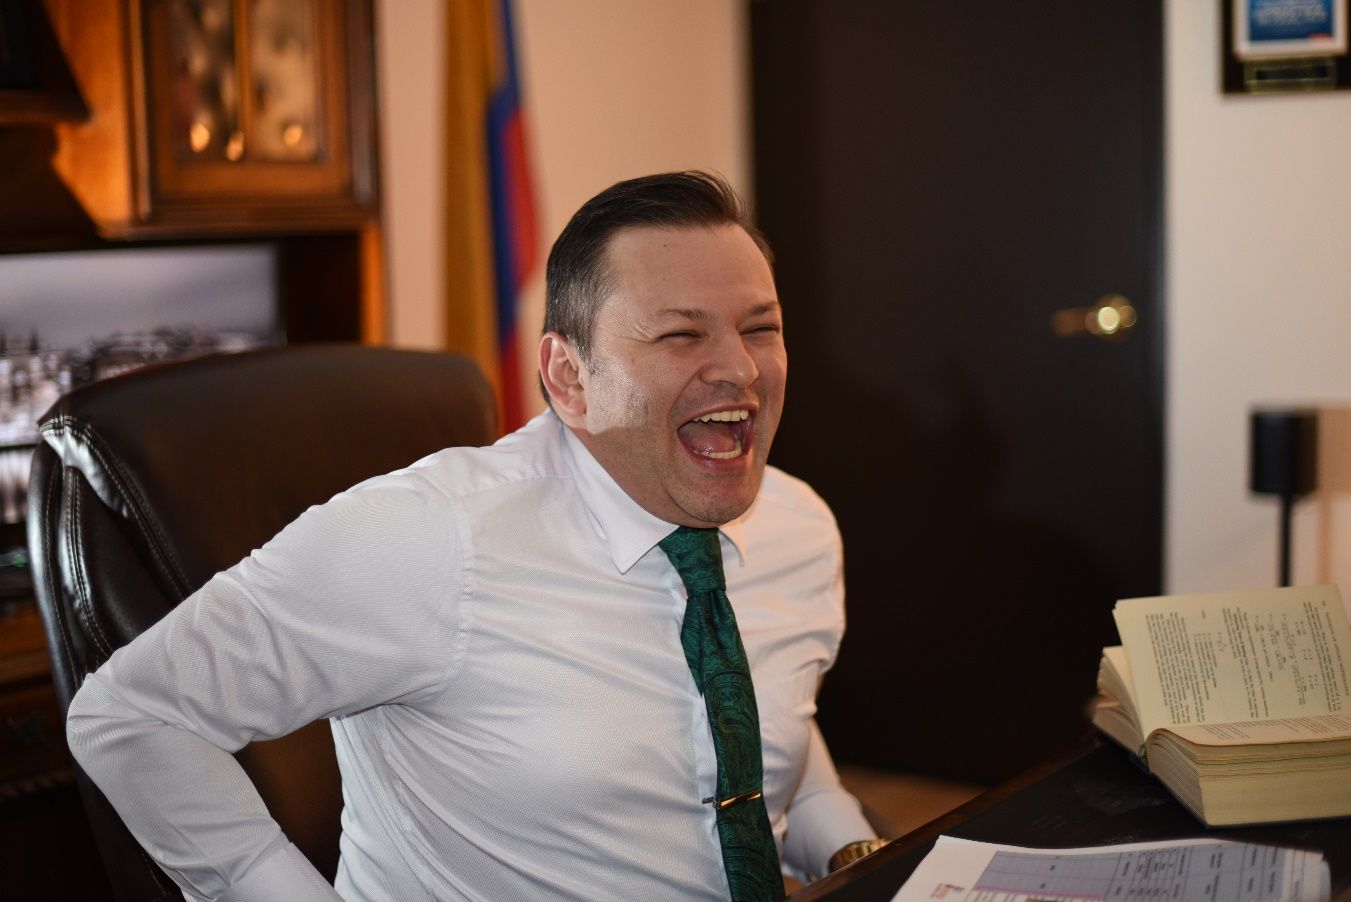 A person in a white shirt and green tie laughing Description automatically generated